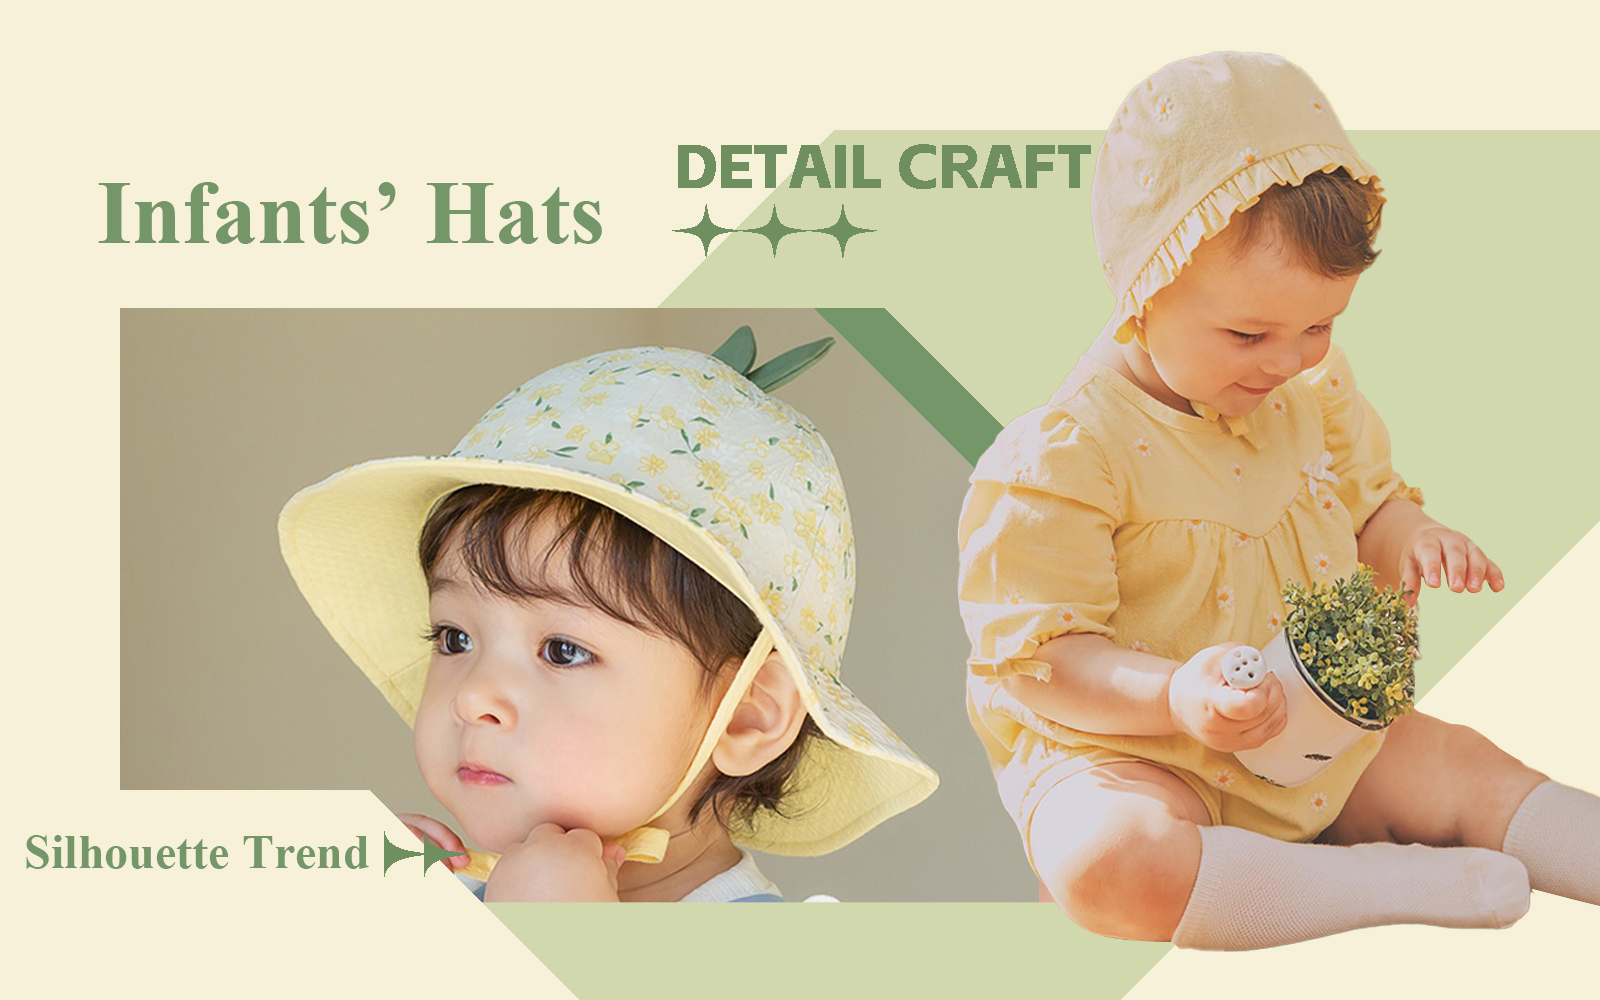 The Silhouette Trend for Infants' Hat